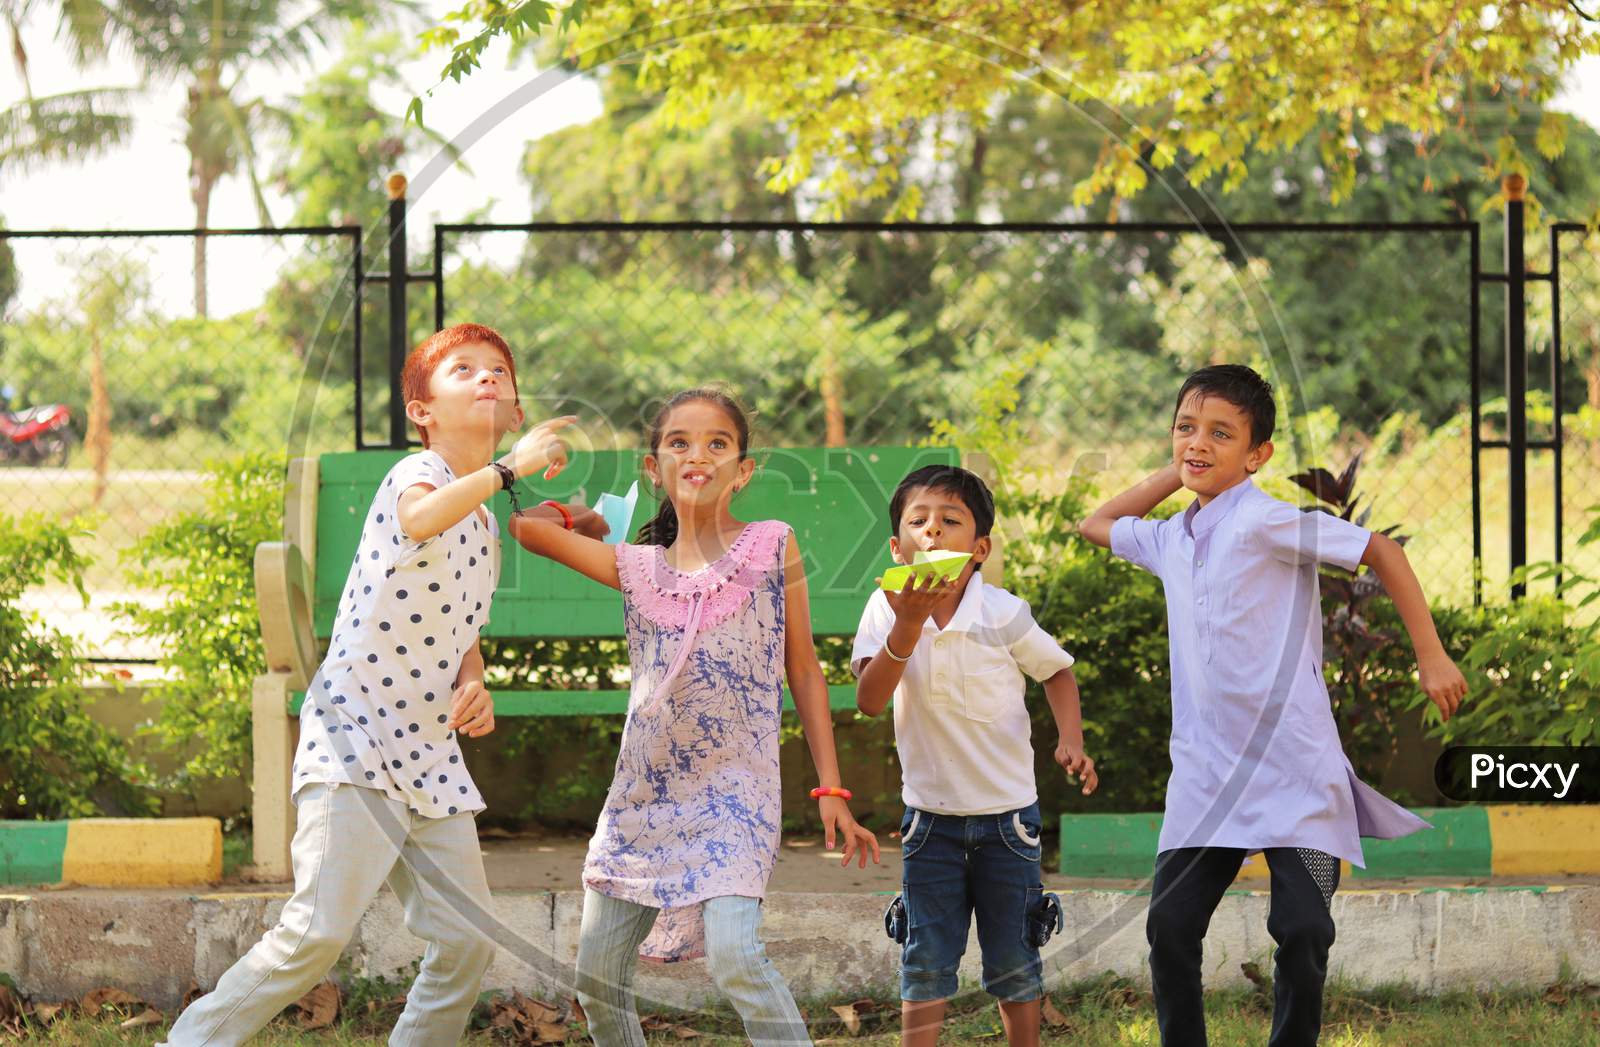 Children's Playing Paper Rocket Game At Park, Outdoor - Boys And Girls, Plays A Paper Rocket Game - Kids Playing Traditional Games Outside During Leisure.